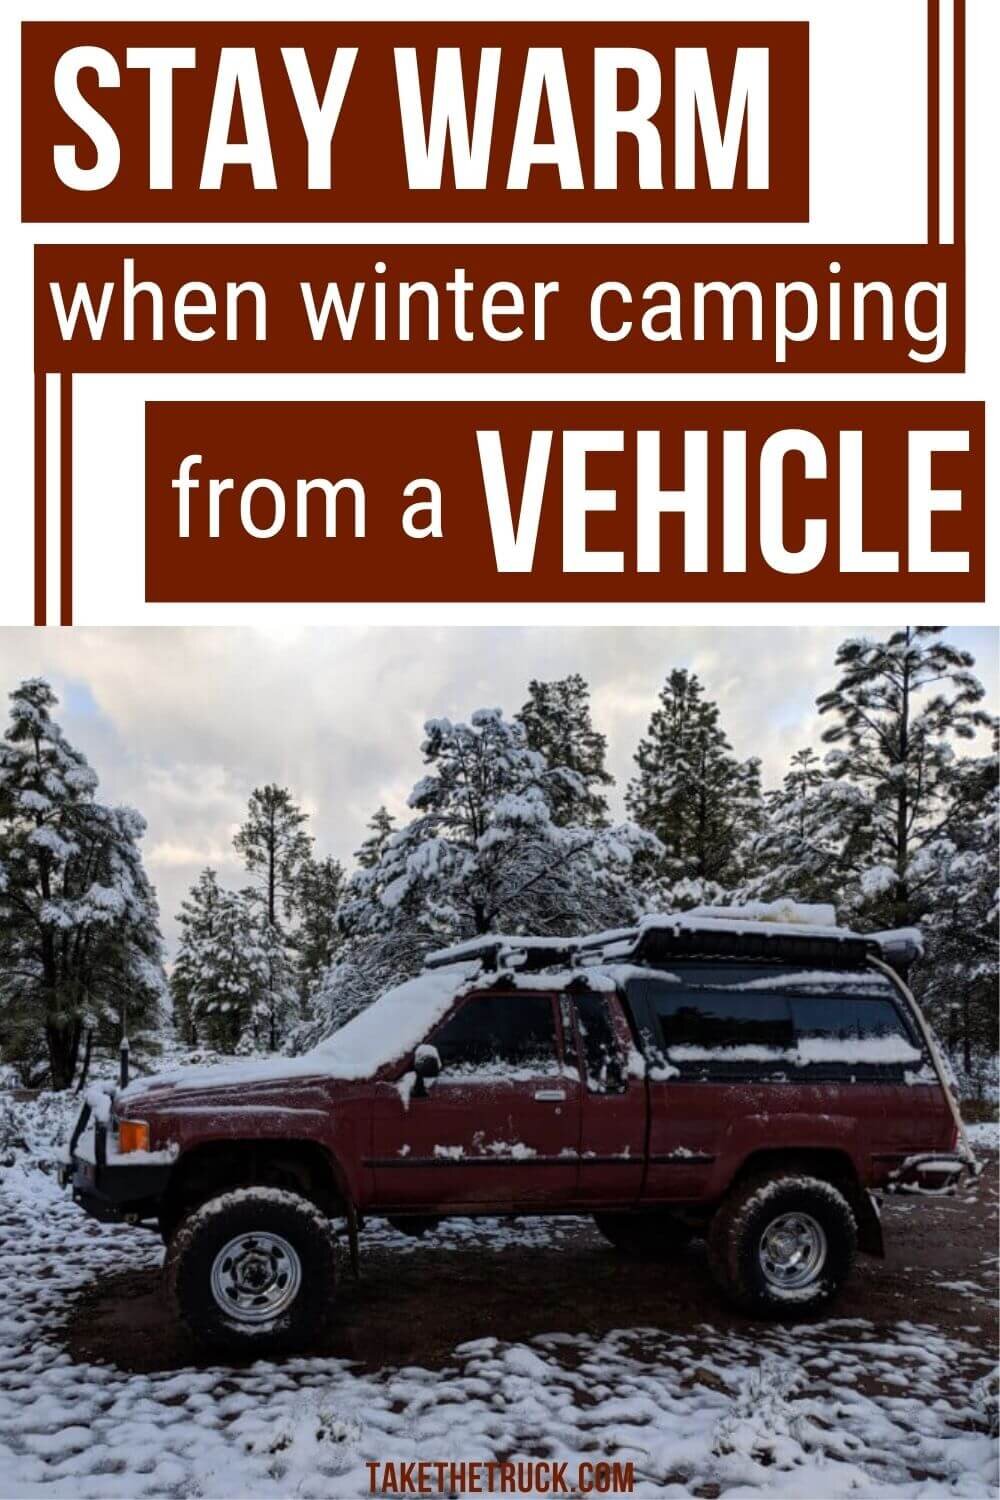 Winter truck camping does not have to be uncomfortable! This post is full of ideas to help you stay warm and comfortable when doing some cold weather truck camping.